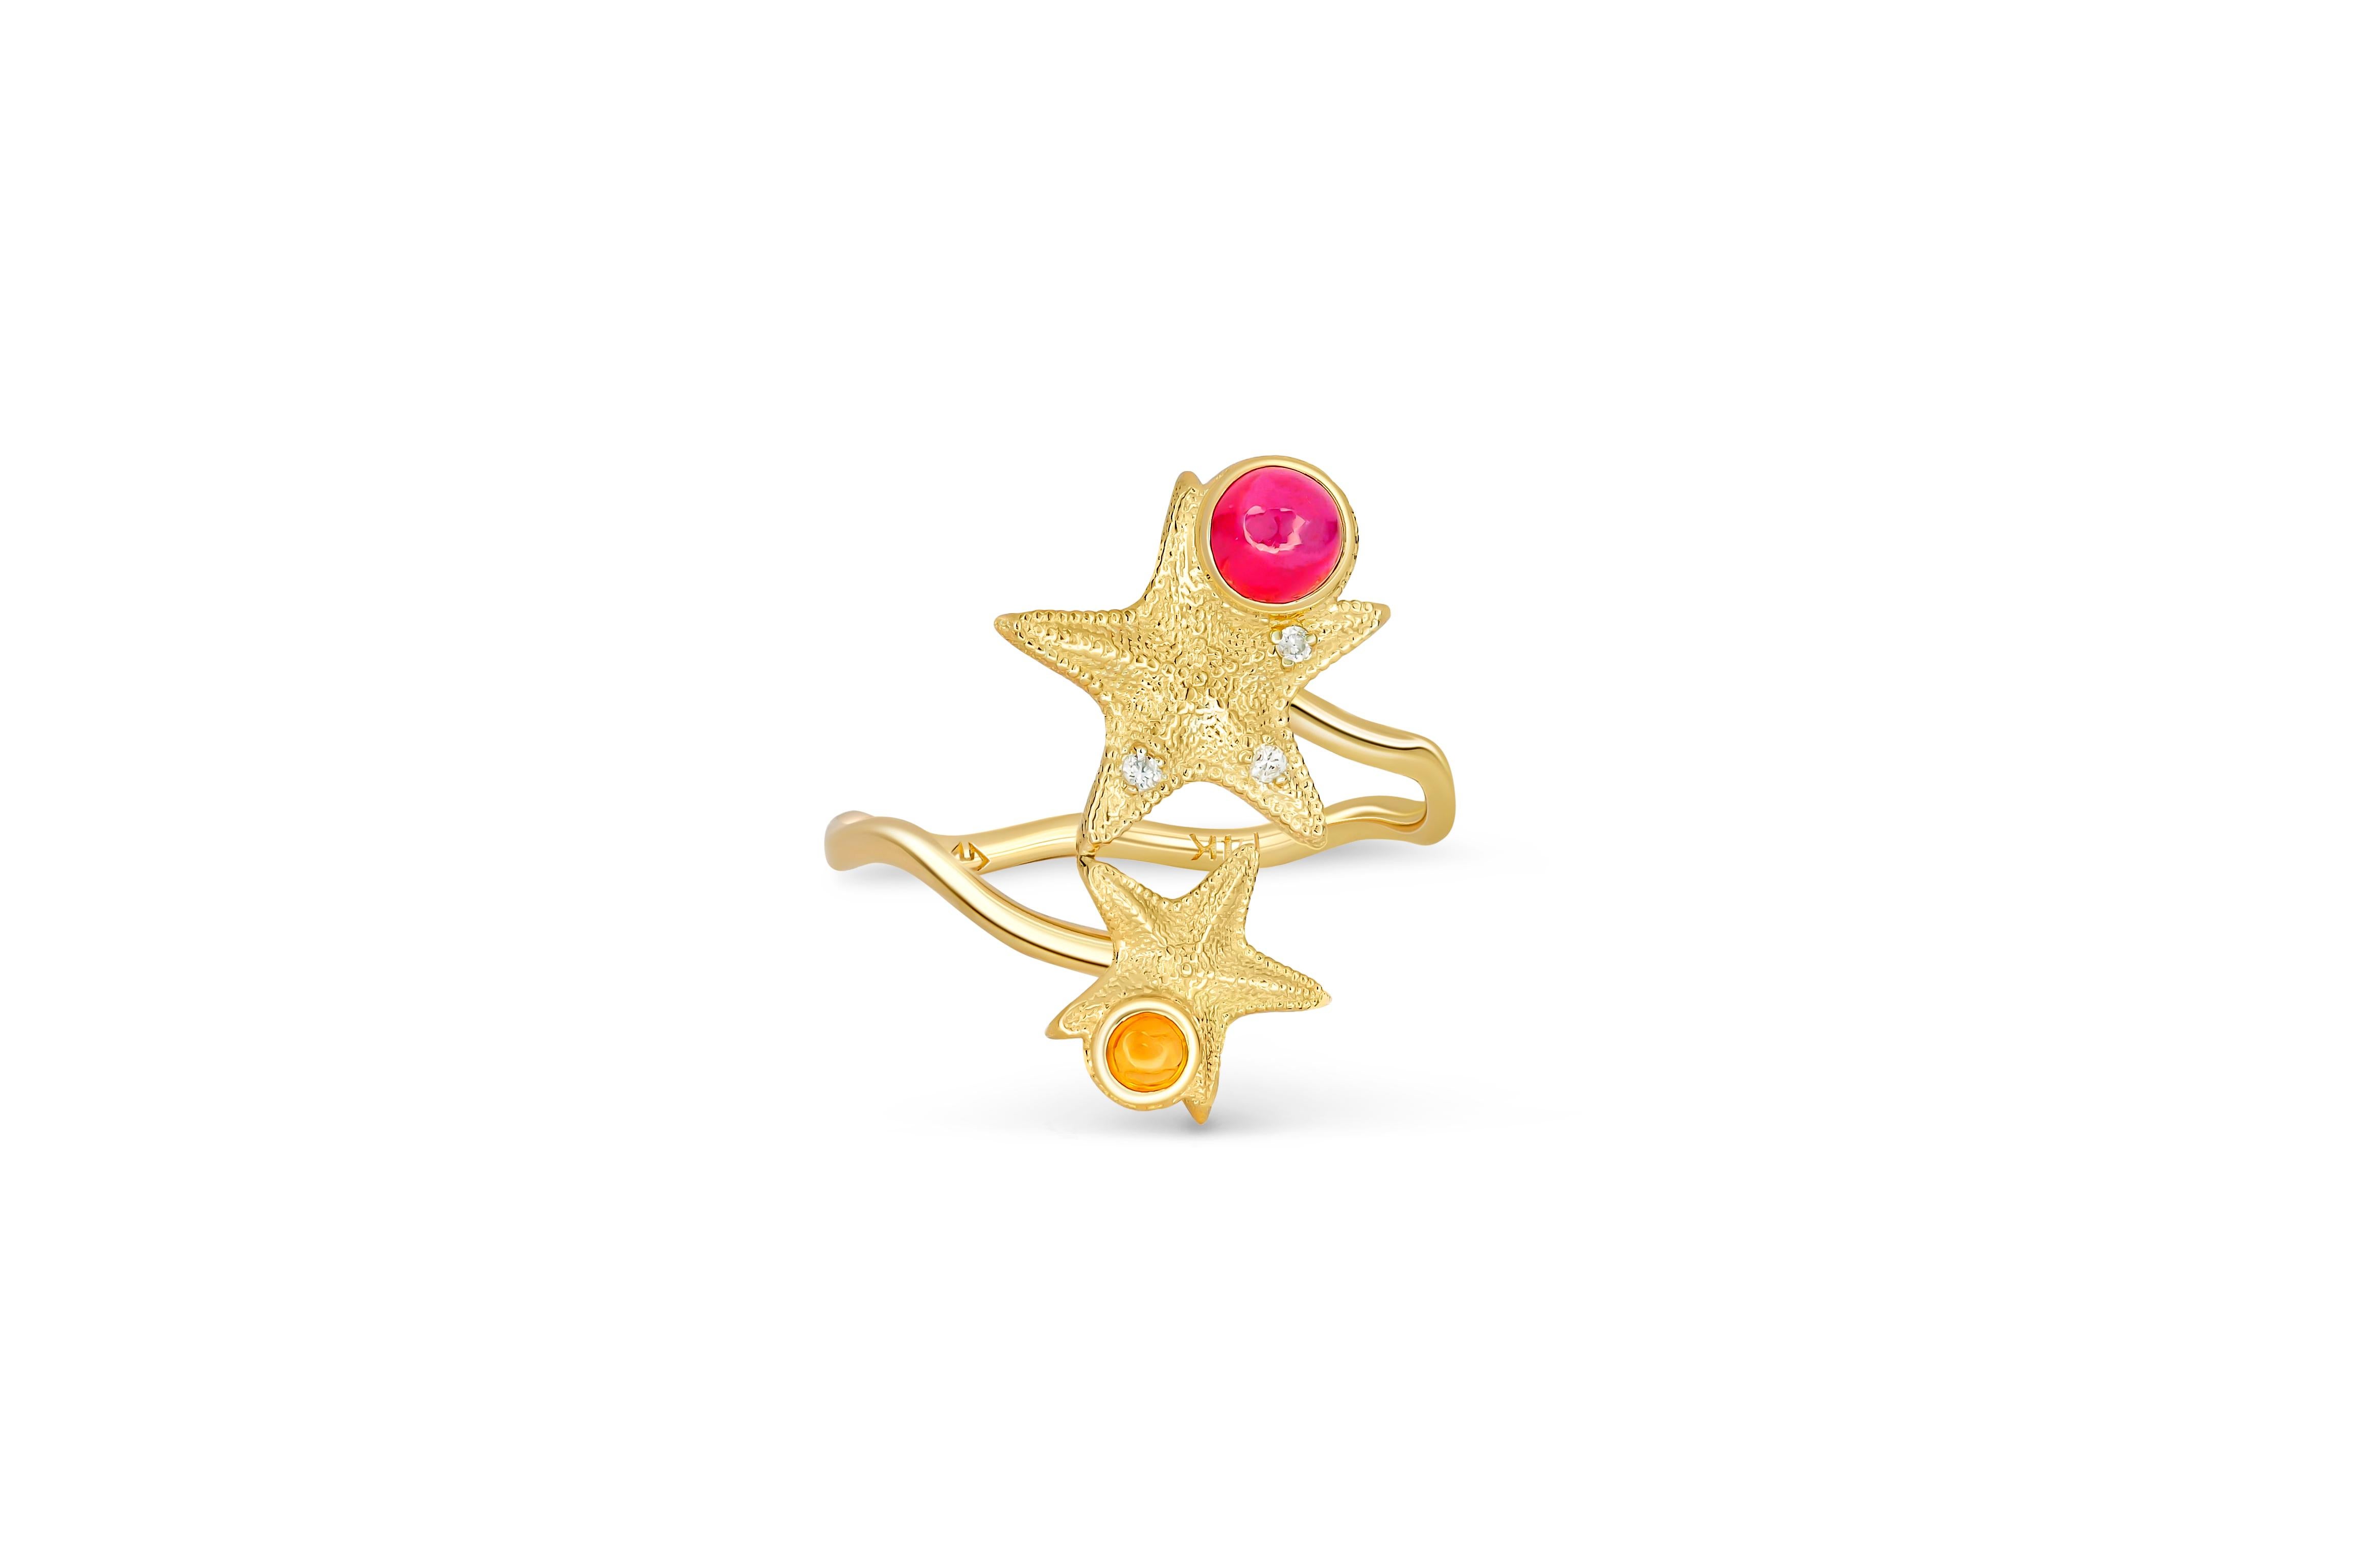 Starfish gemstone ring. 
Ruby, Sapphire 14k Gold Ring. Star fish ring with ruby, sapphire. Summer gold ring. Cabochone gold ring.

Metal: 14k gold
Weight: 2.10 g. depends from size.

Ruby: color - red
Round cabochon cut, 0.55 ct. approx
Clarity: